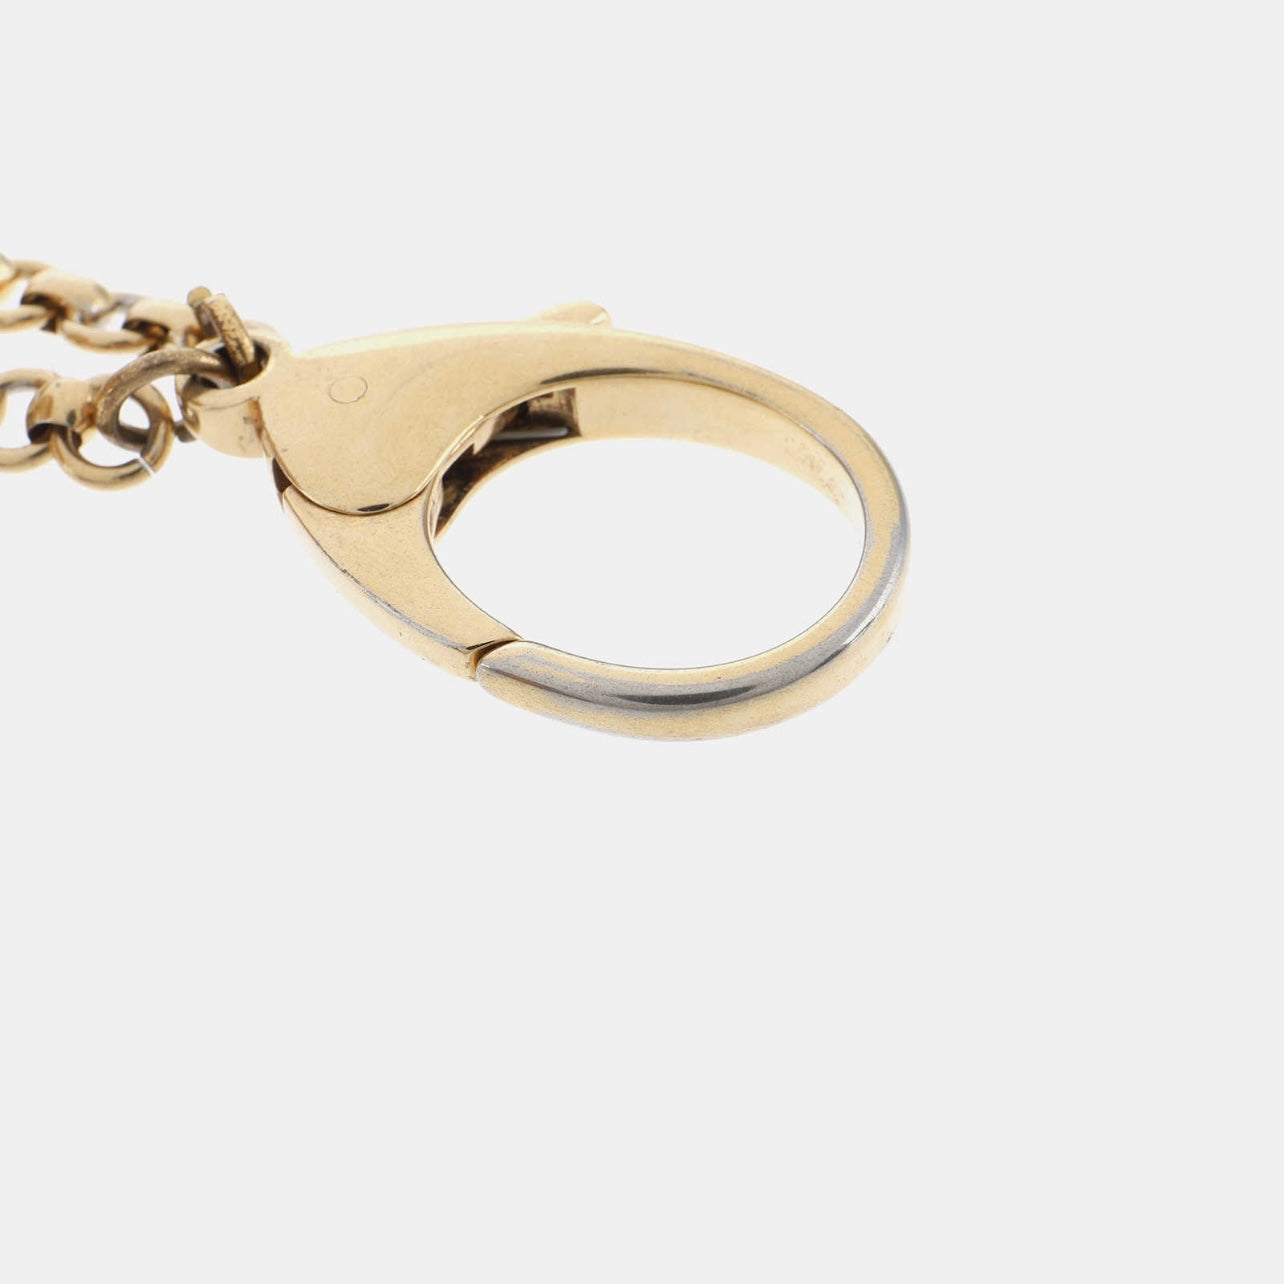 Products By Louis Vuitton: Signature Chain Ring